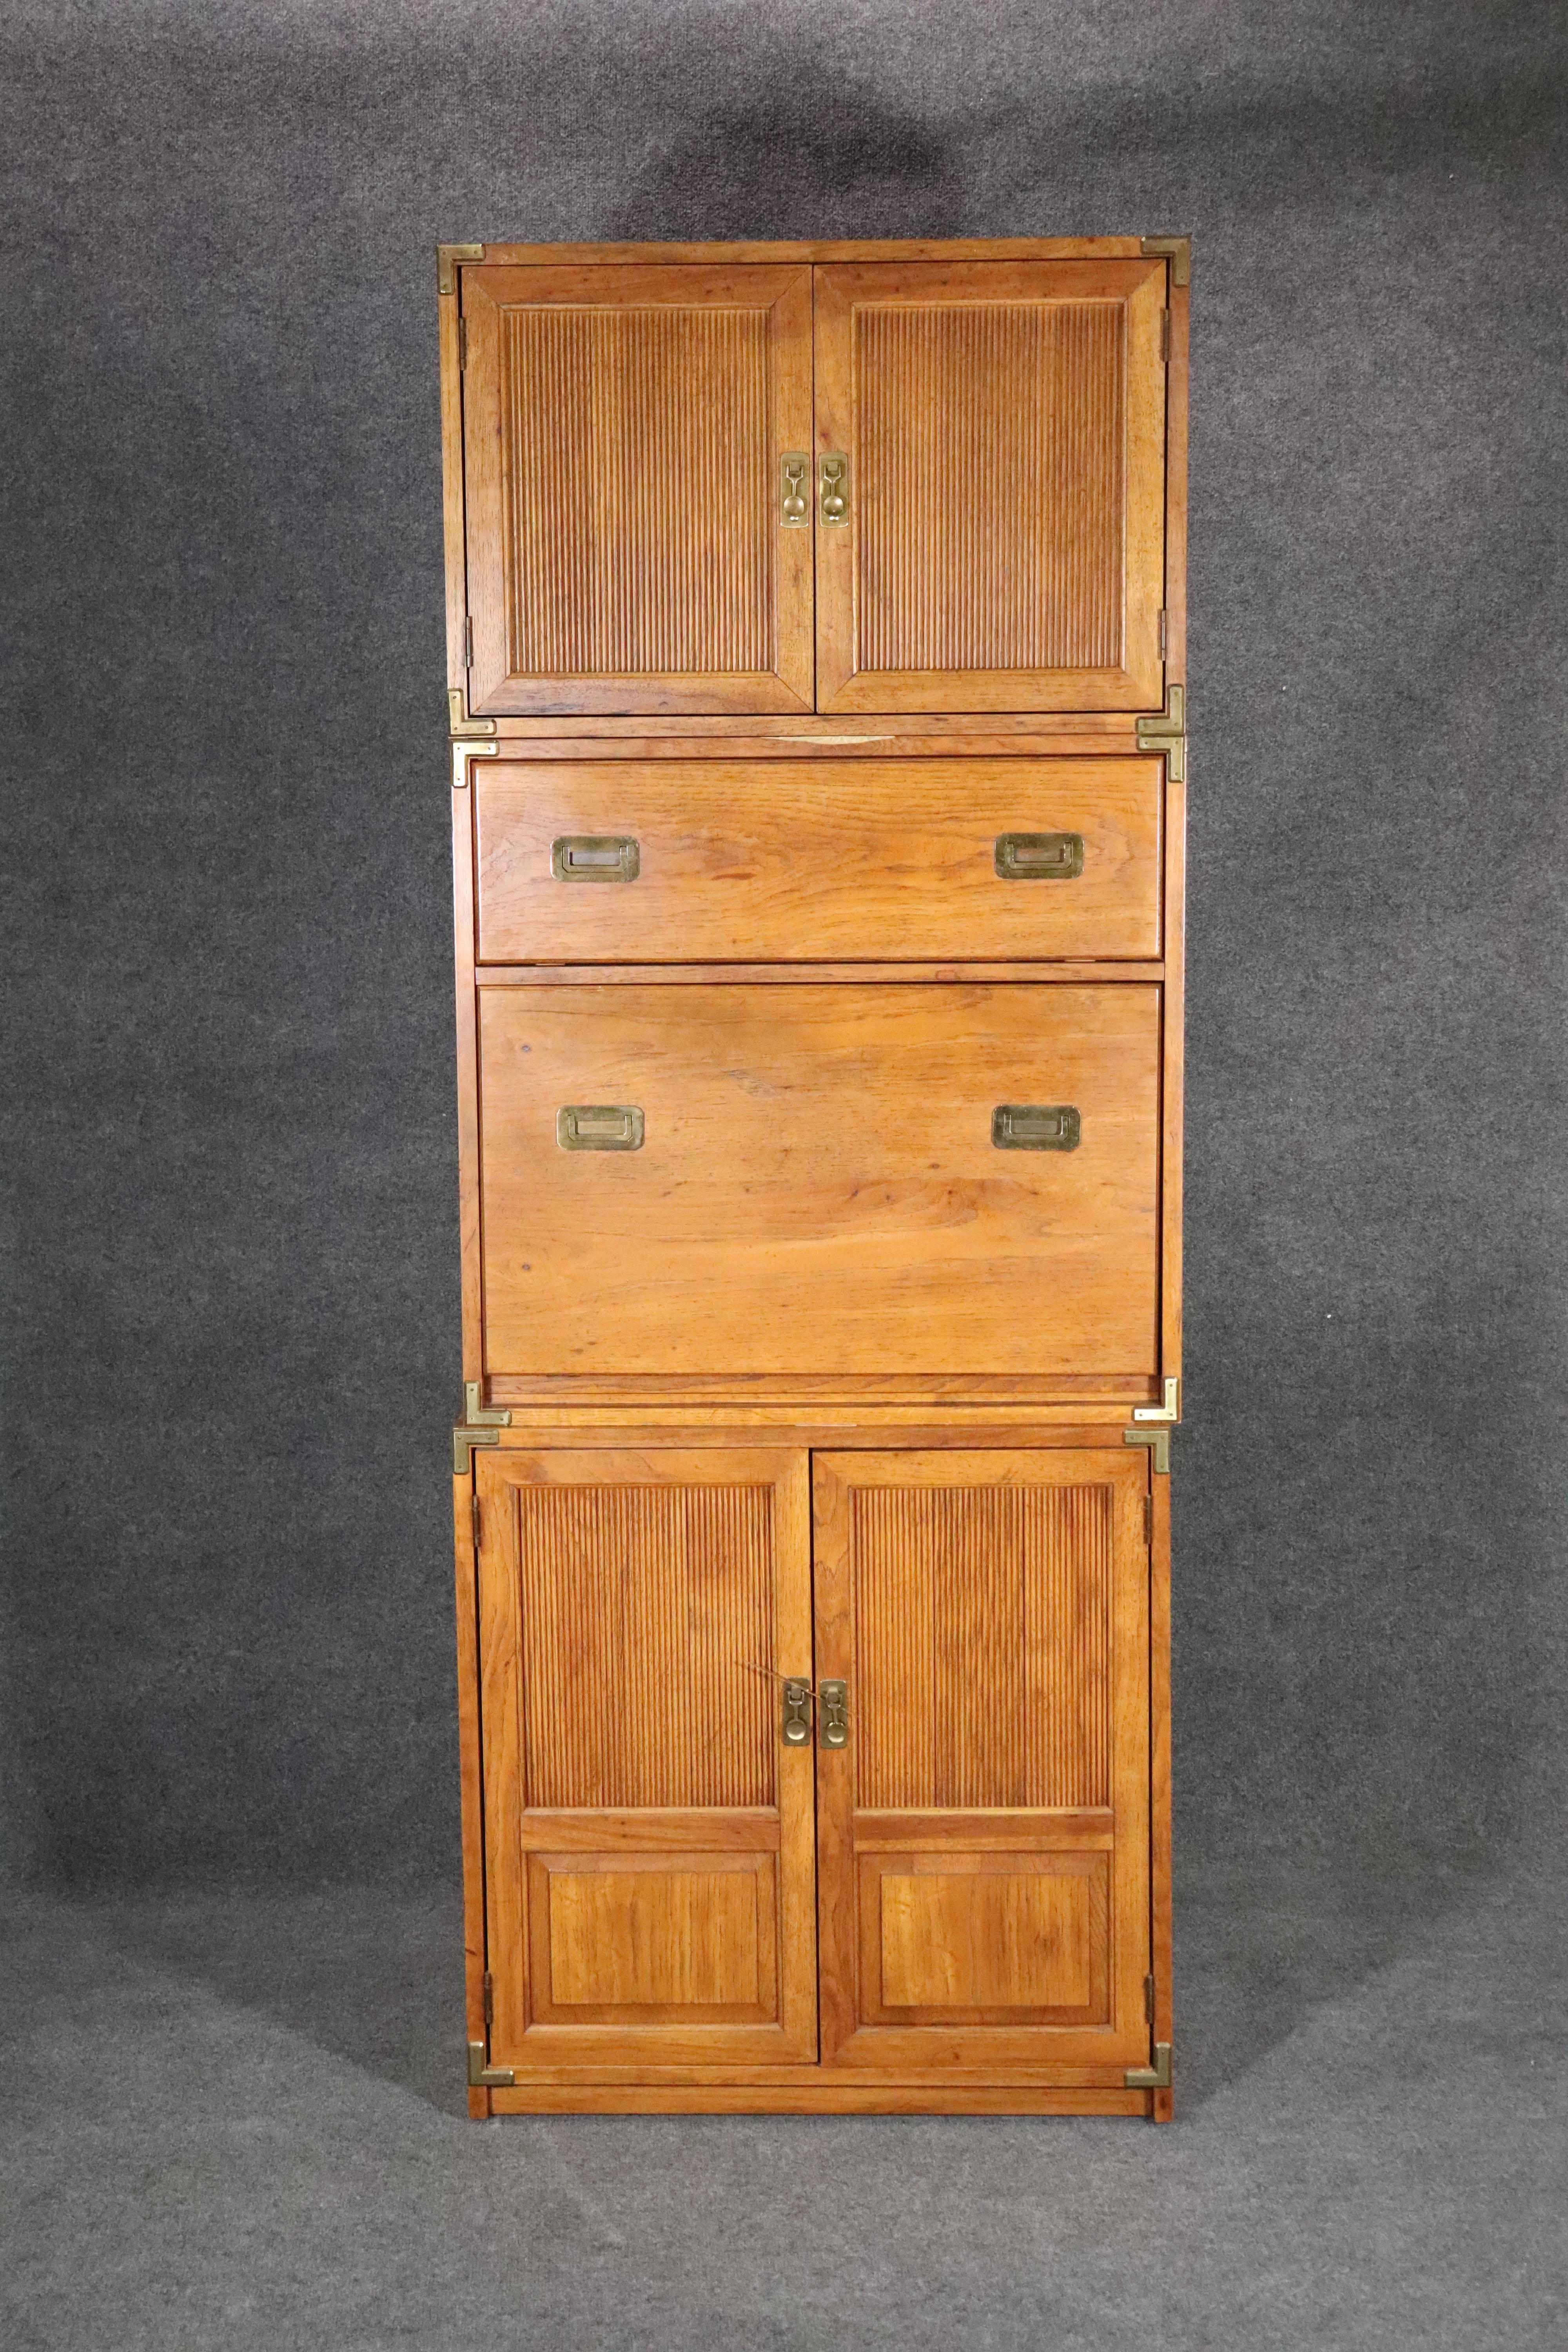 Mid-century stacking cabinet with drop front desk. Attractive campaign style with brass hardware.
Please confirm location NY or NJ.